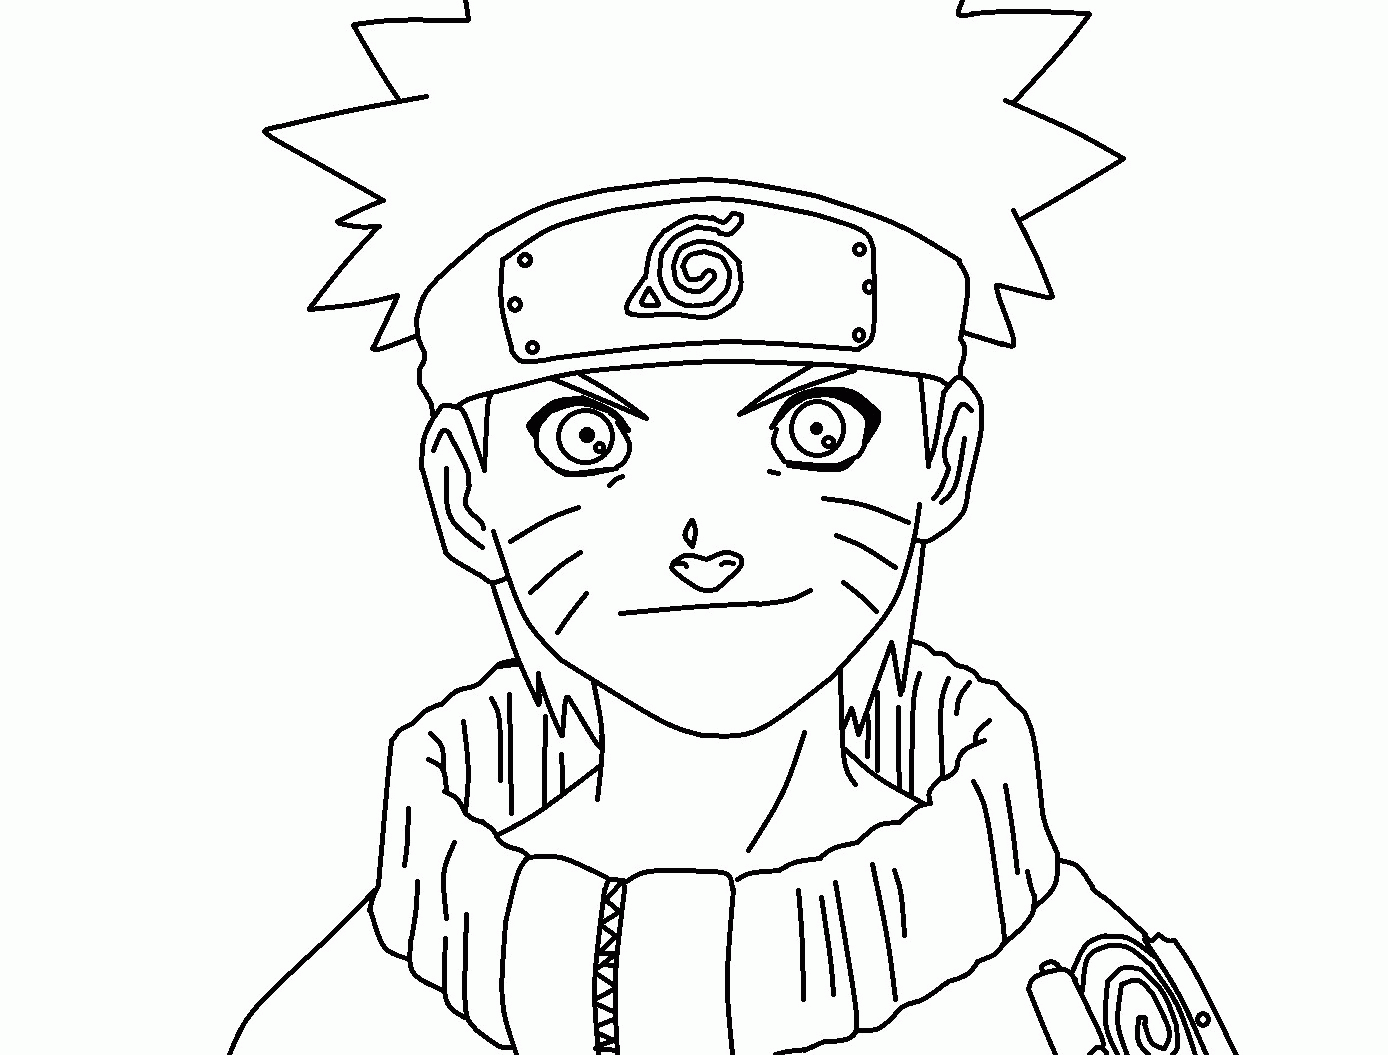 Naruto Coloring Pages Pdf   Coloring Home